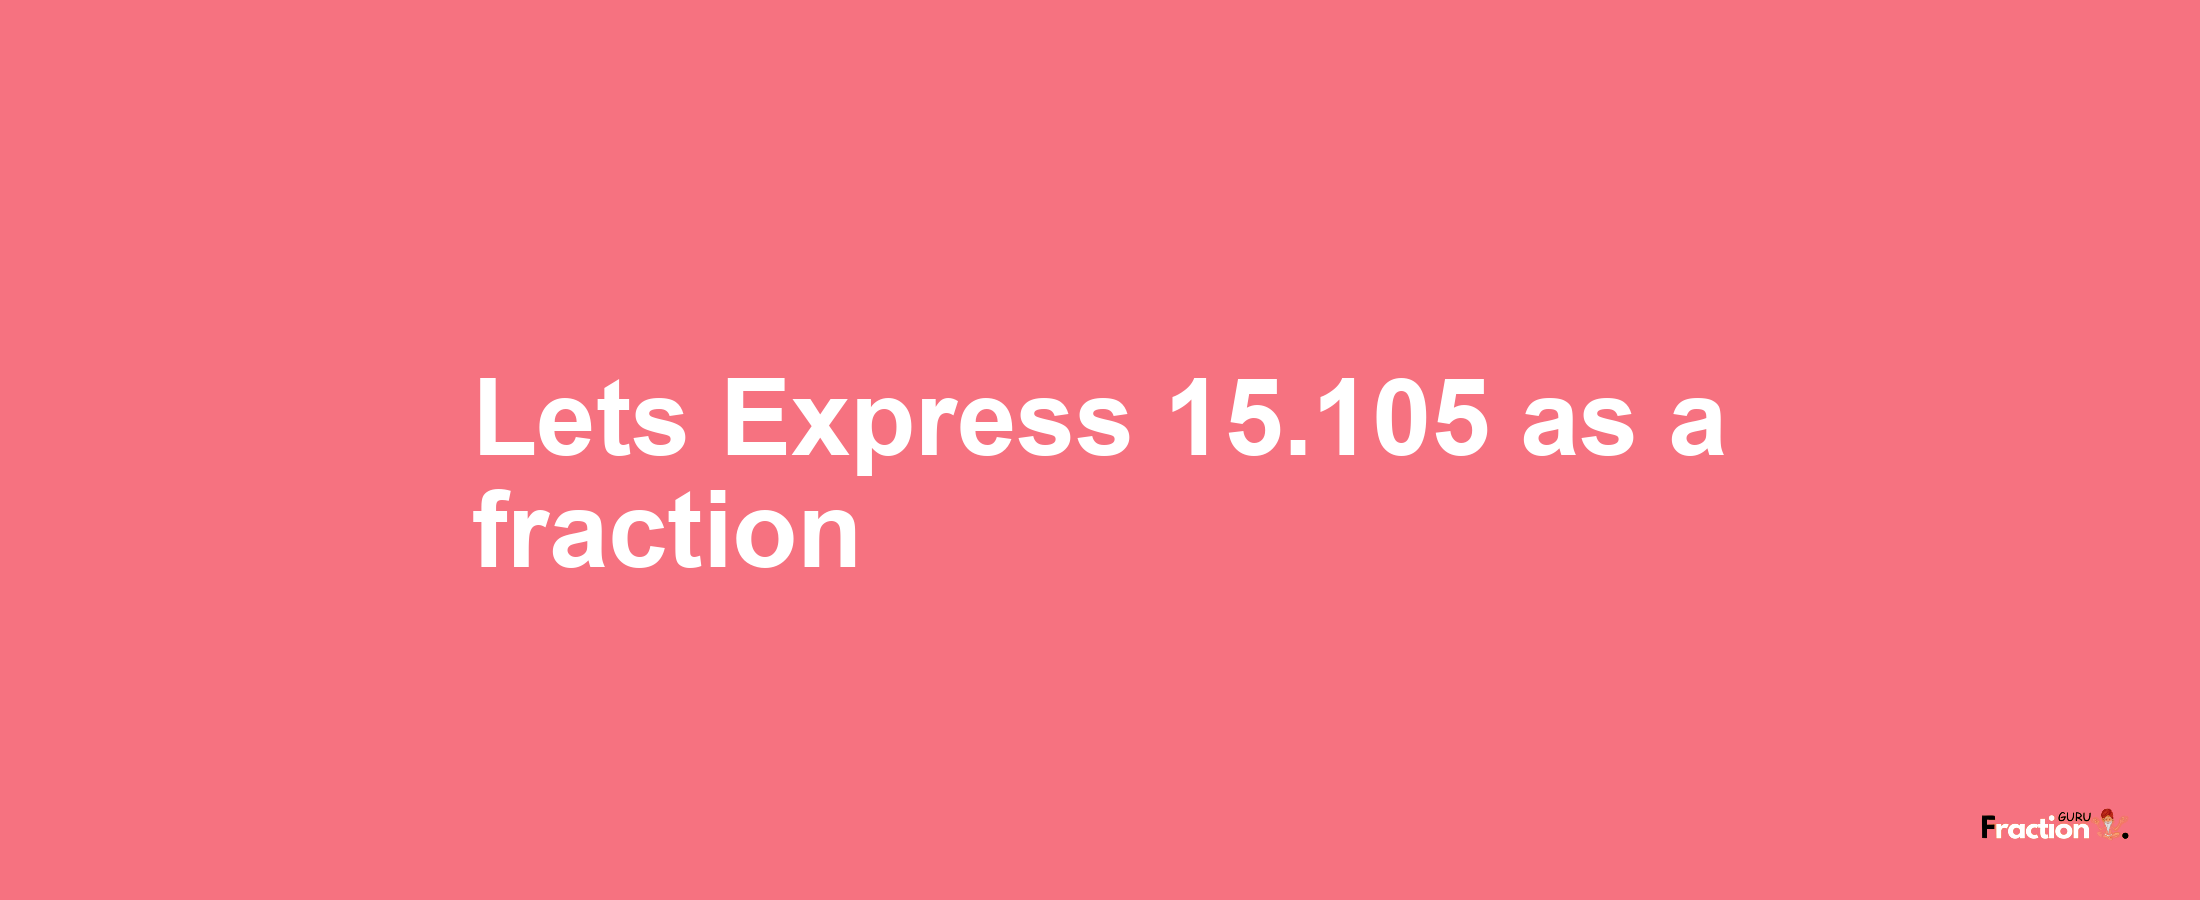 Lets Express 15.105 as afraction